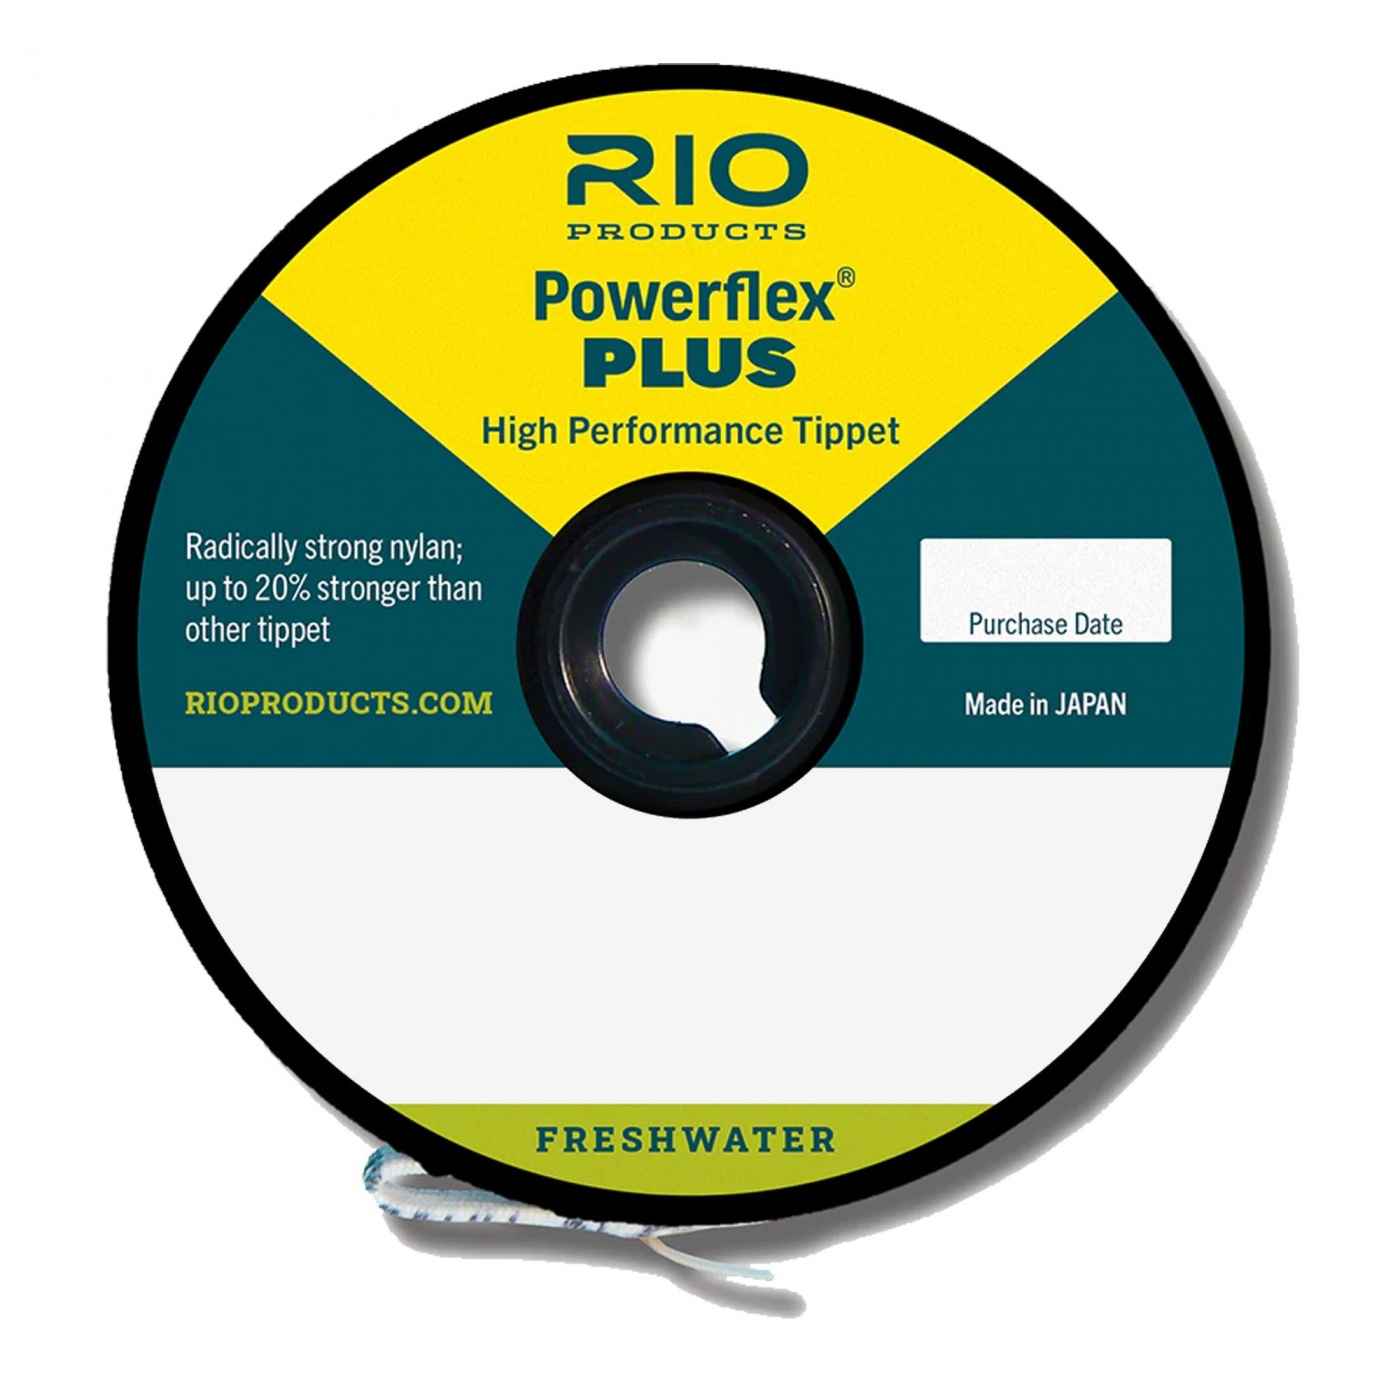 Rio Products Powerflex Plus Tippet 2X 12lb / 5.5kg For Trout & Grayling Fly Fishing